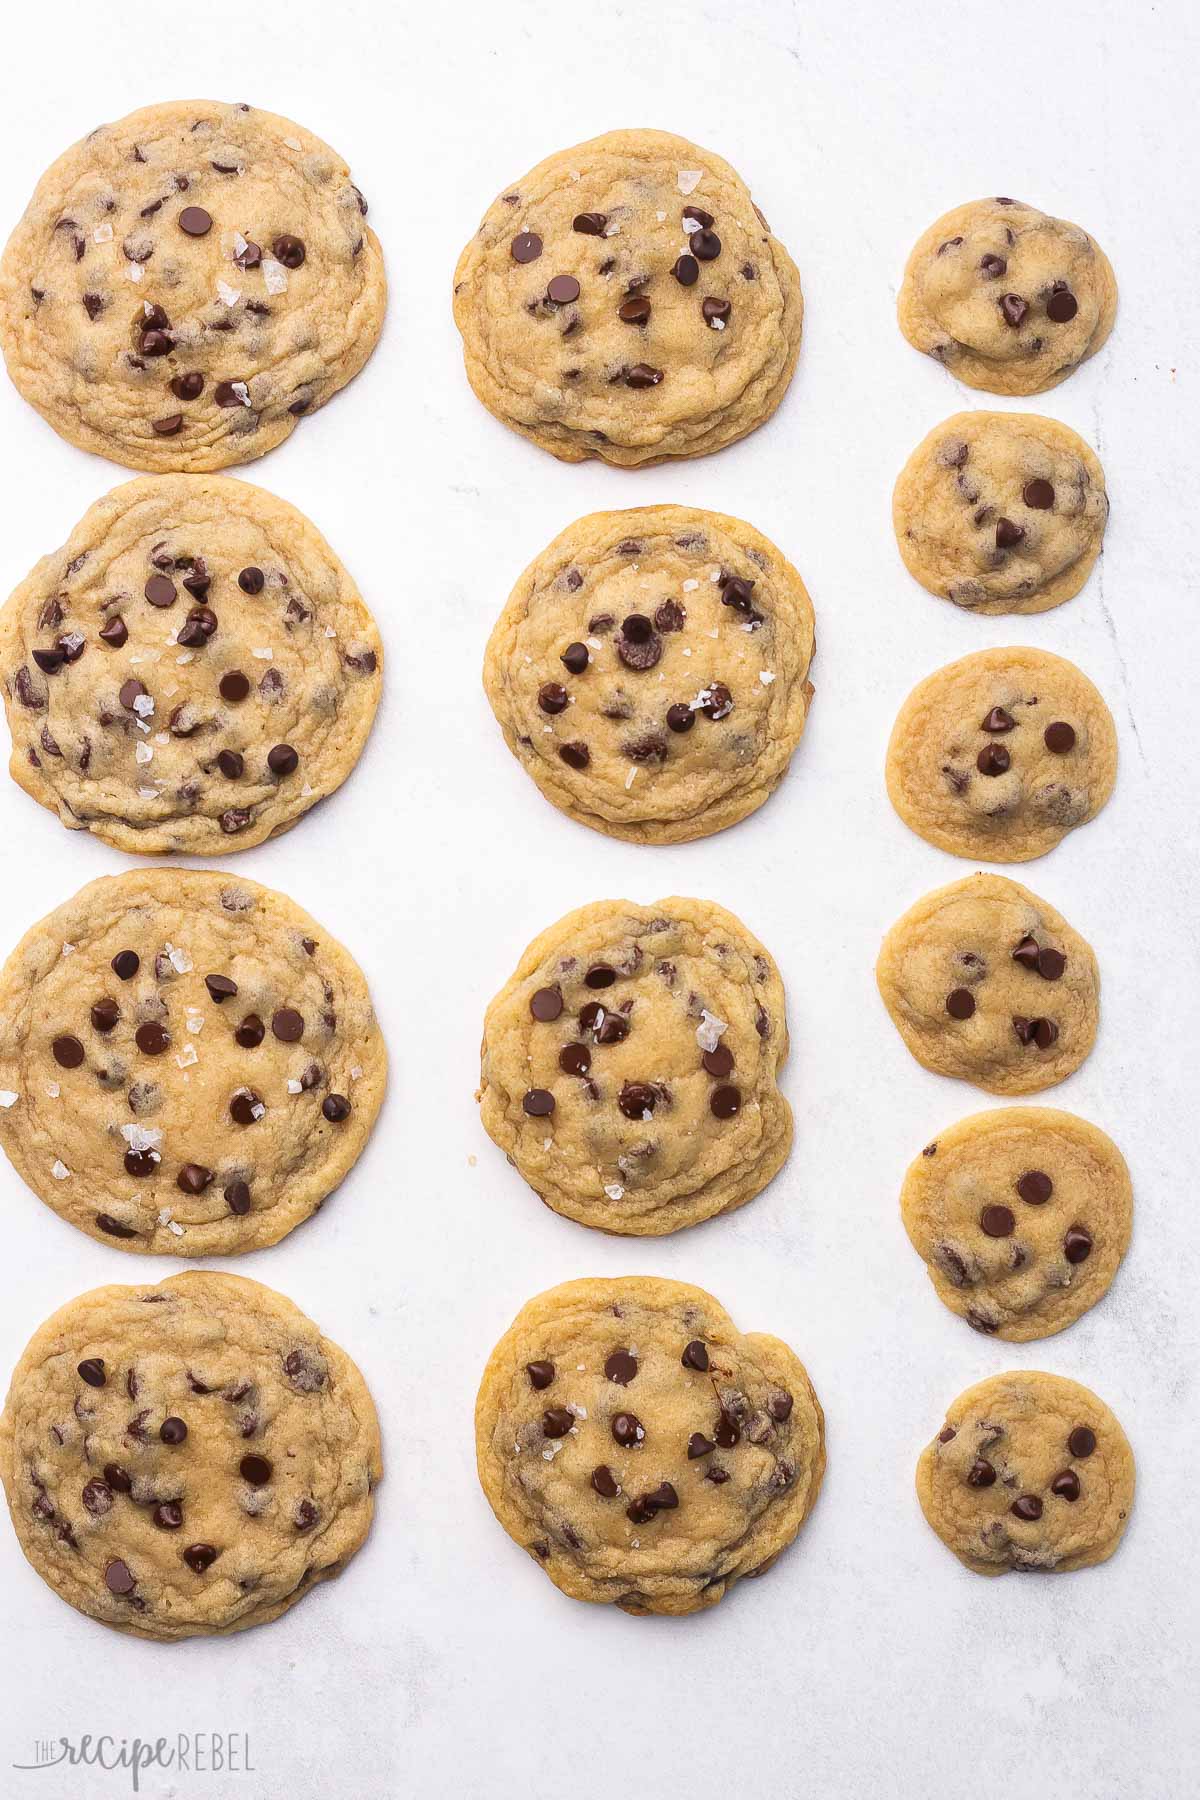 overhead view of baked chocolate chip cookies in various sizes on grey surface.